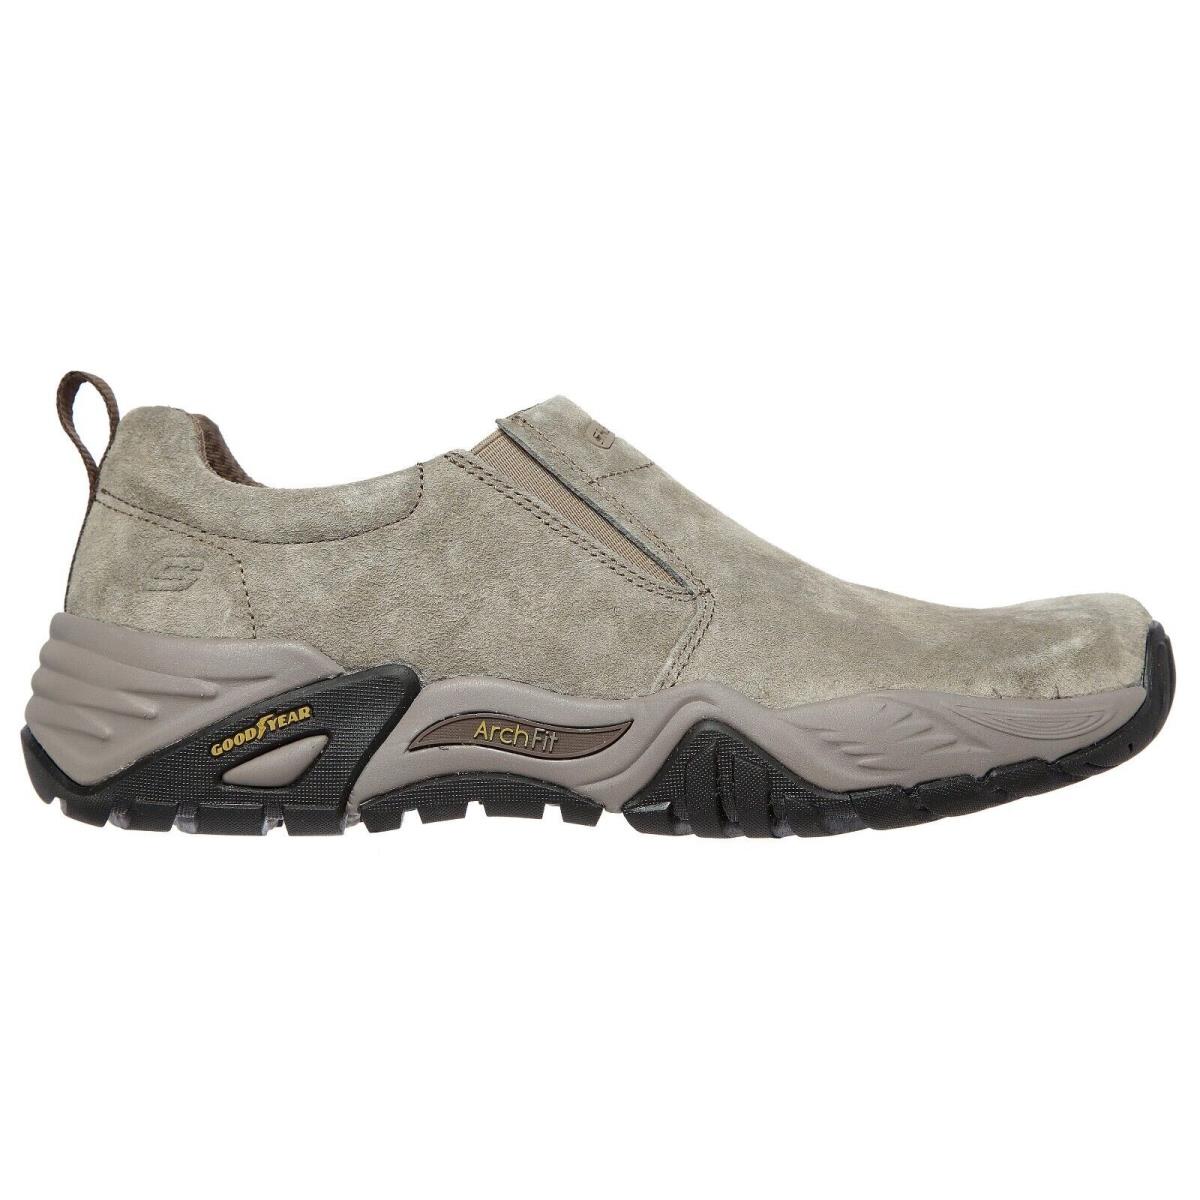 Skechers shoes Recon Sandro - Taupe 10